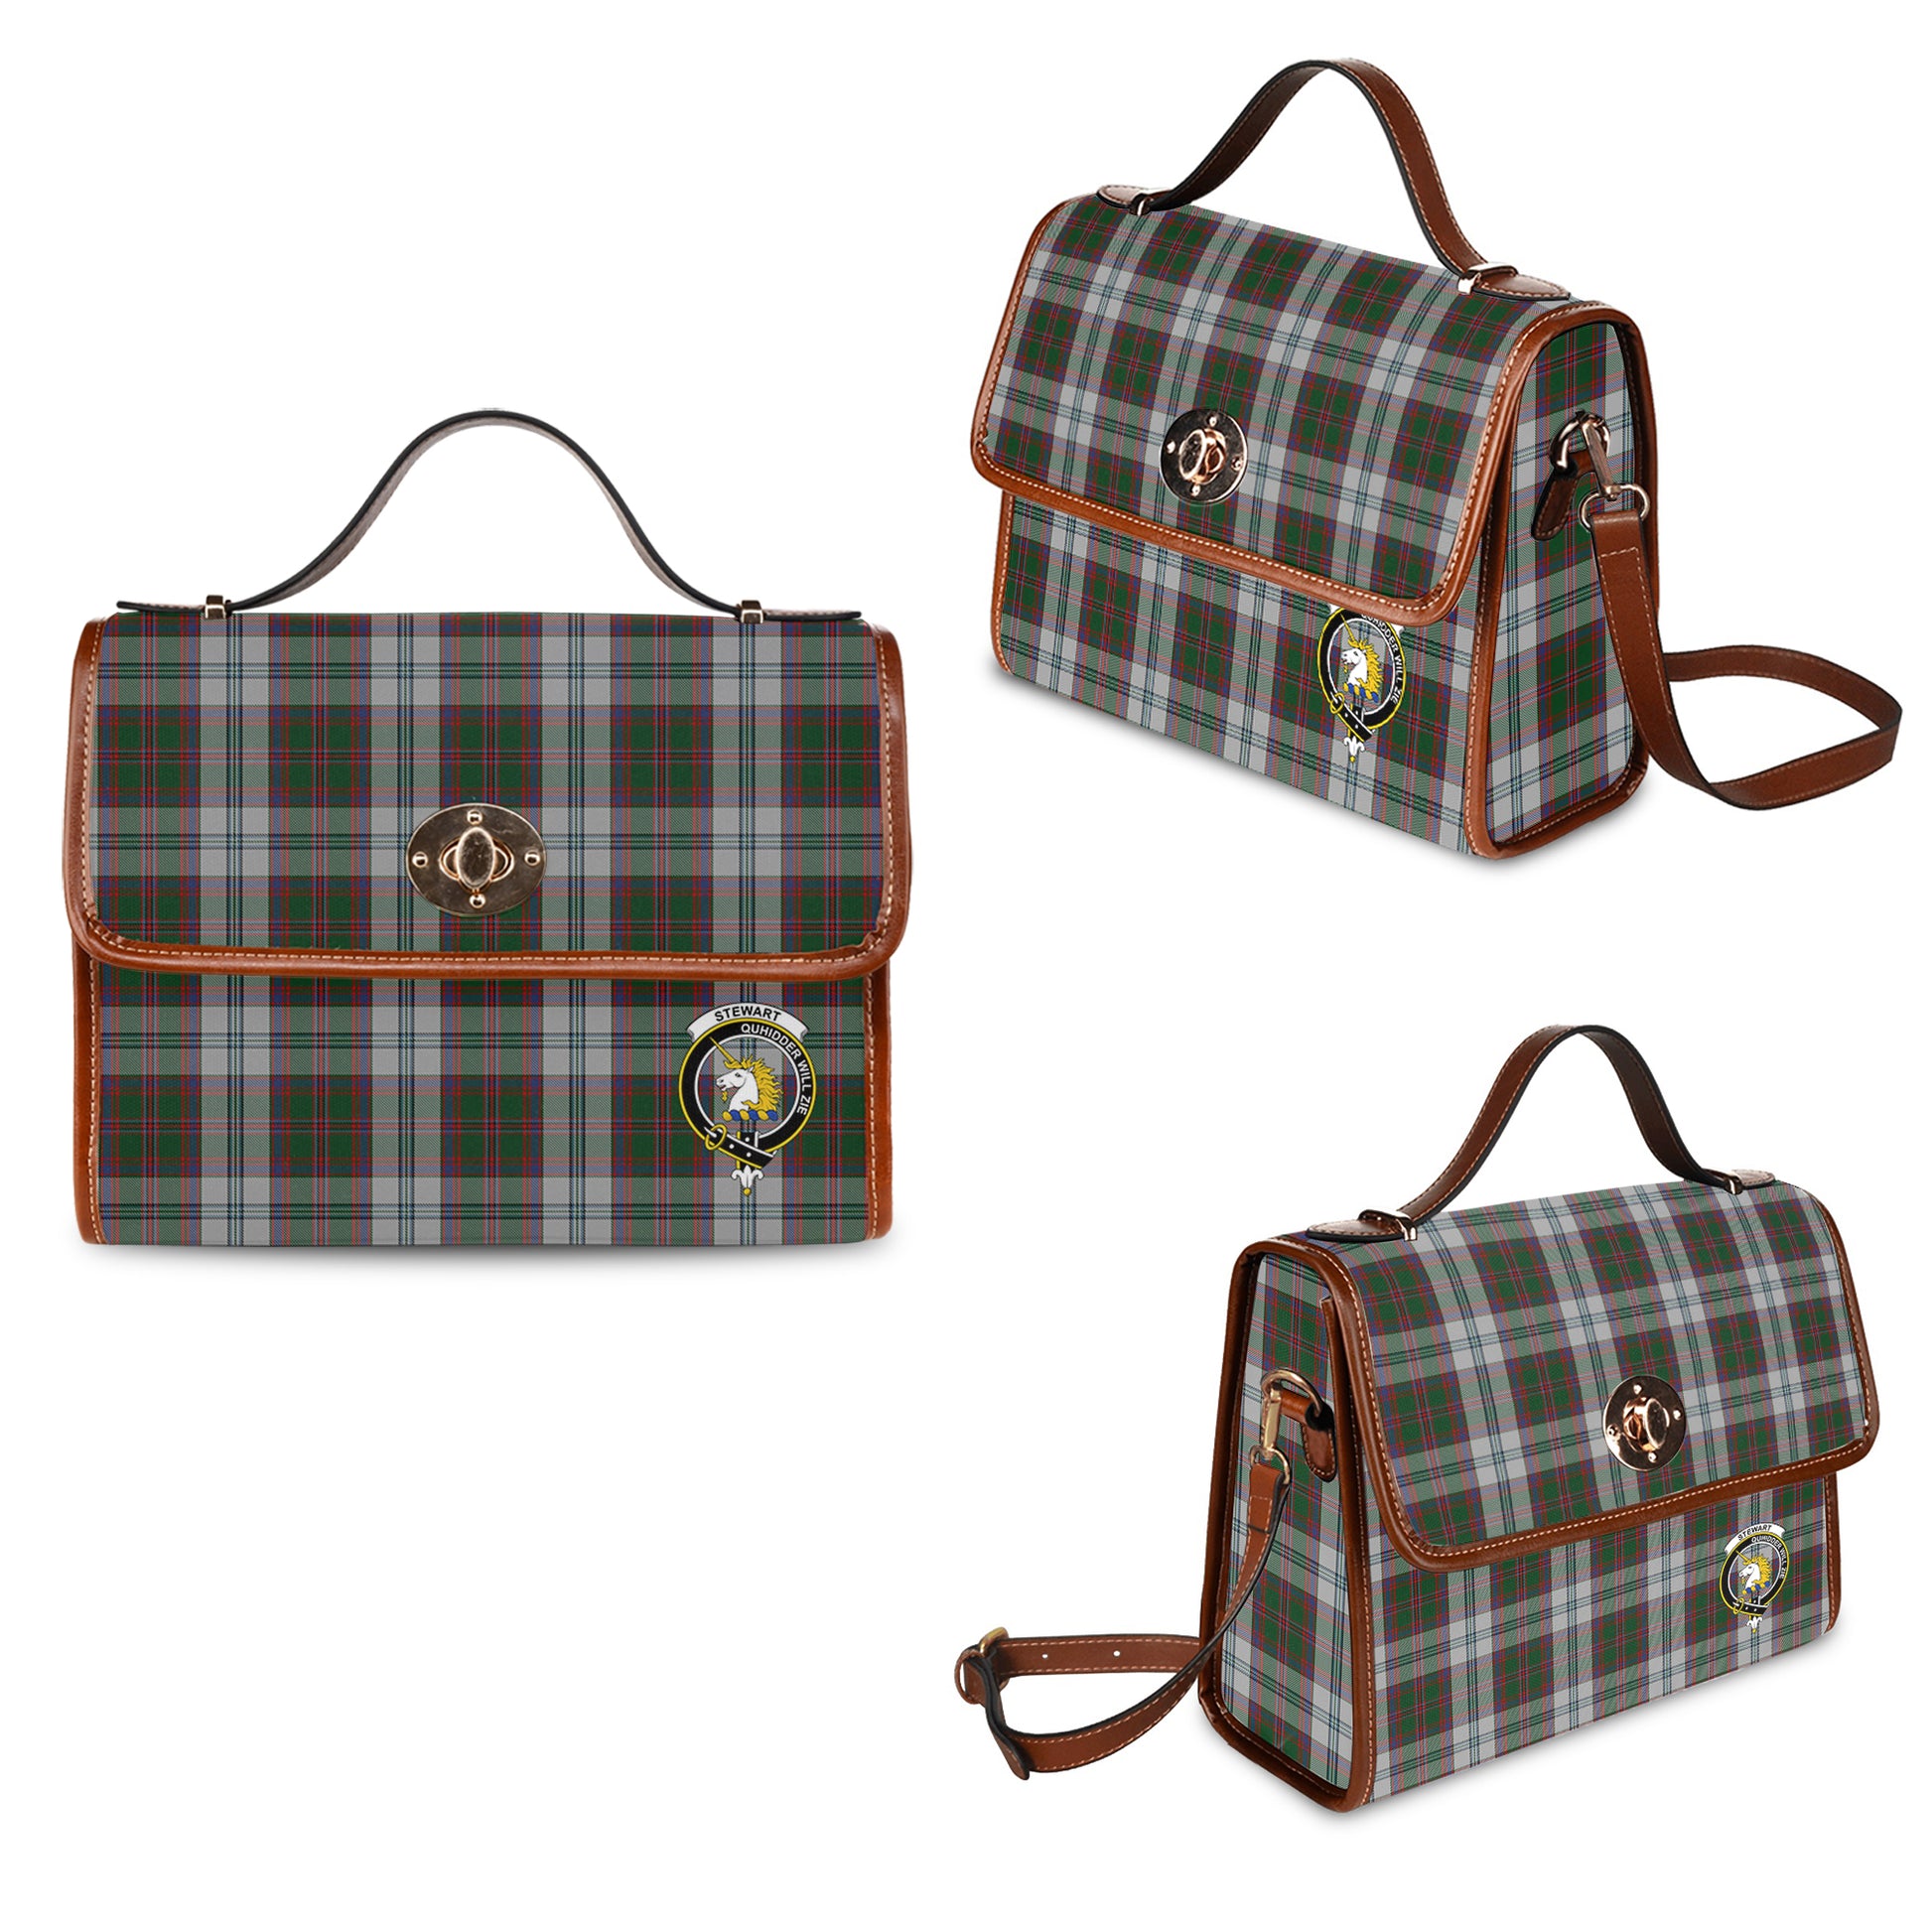 Stewart of Appin Dress Tartan Leather Strap Waterproof Canvas Bag with Family Crest One Size 34cm * 42cm (13.4" x 16.5") - Tartanvibesclothing